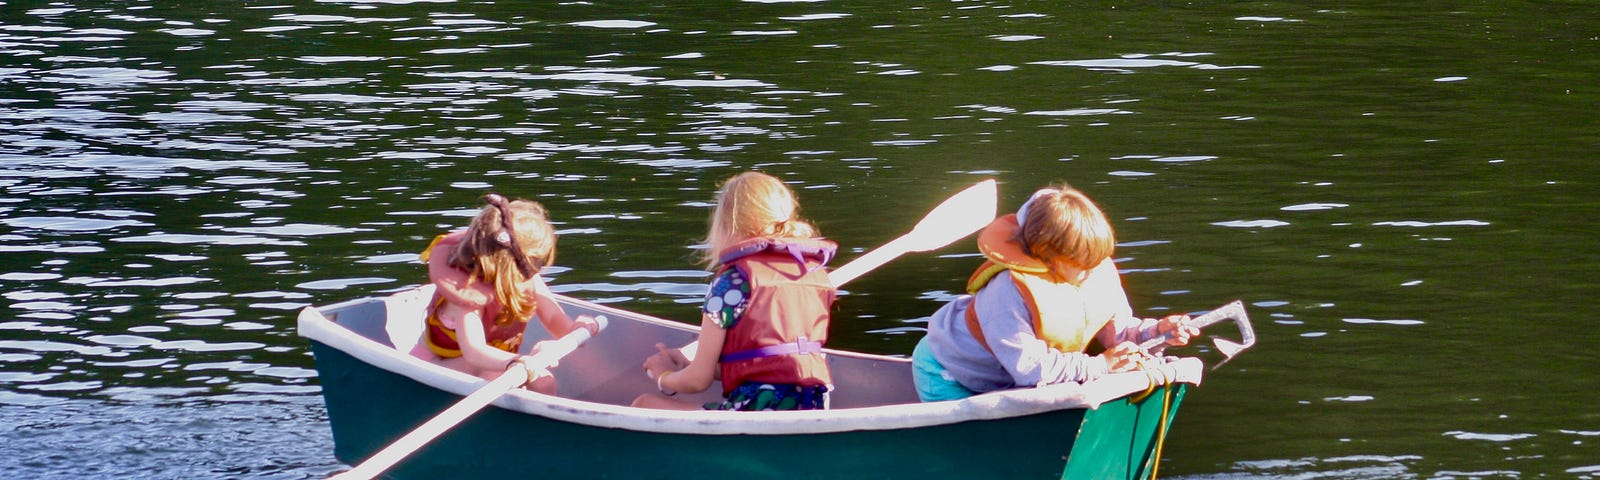 Three children sit in a green rowboat. Two of them are holding oars. One is hanging over the stern of the boat.